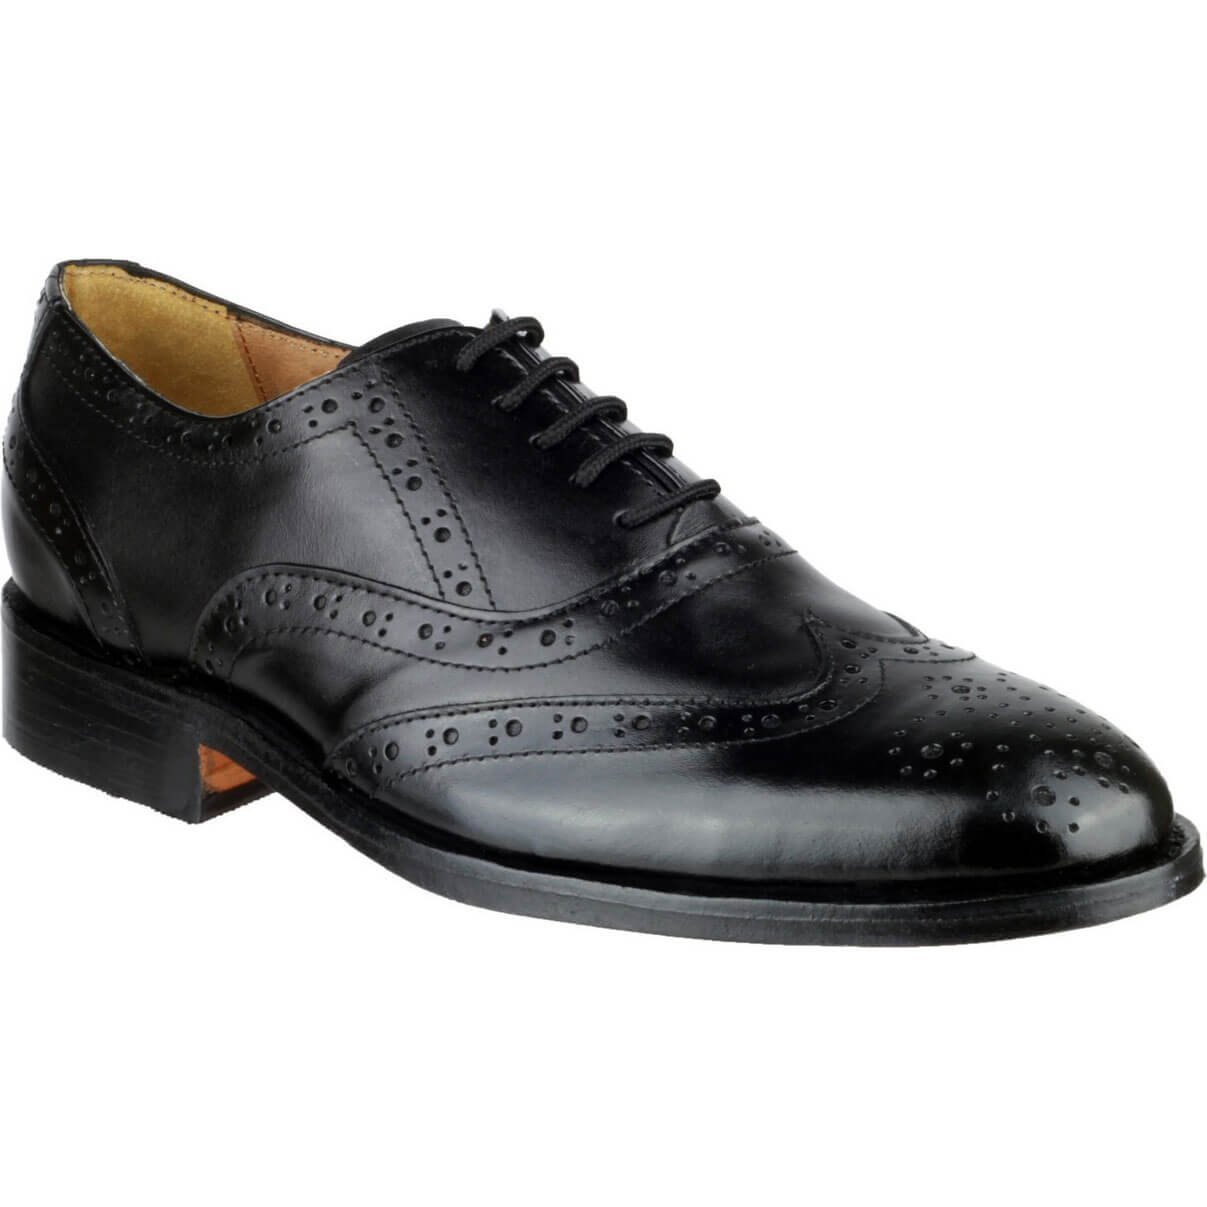 Image of Amblers Ben Leather Soled Oxford Brogue Black Size 12